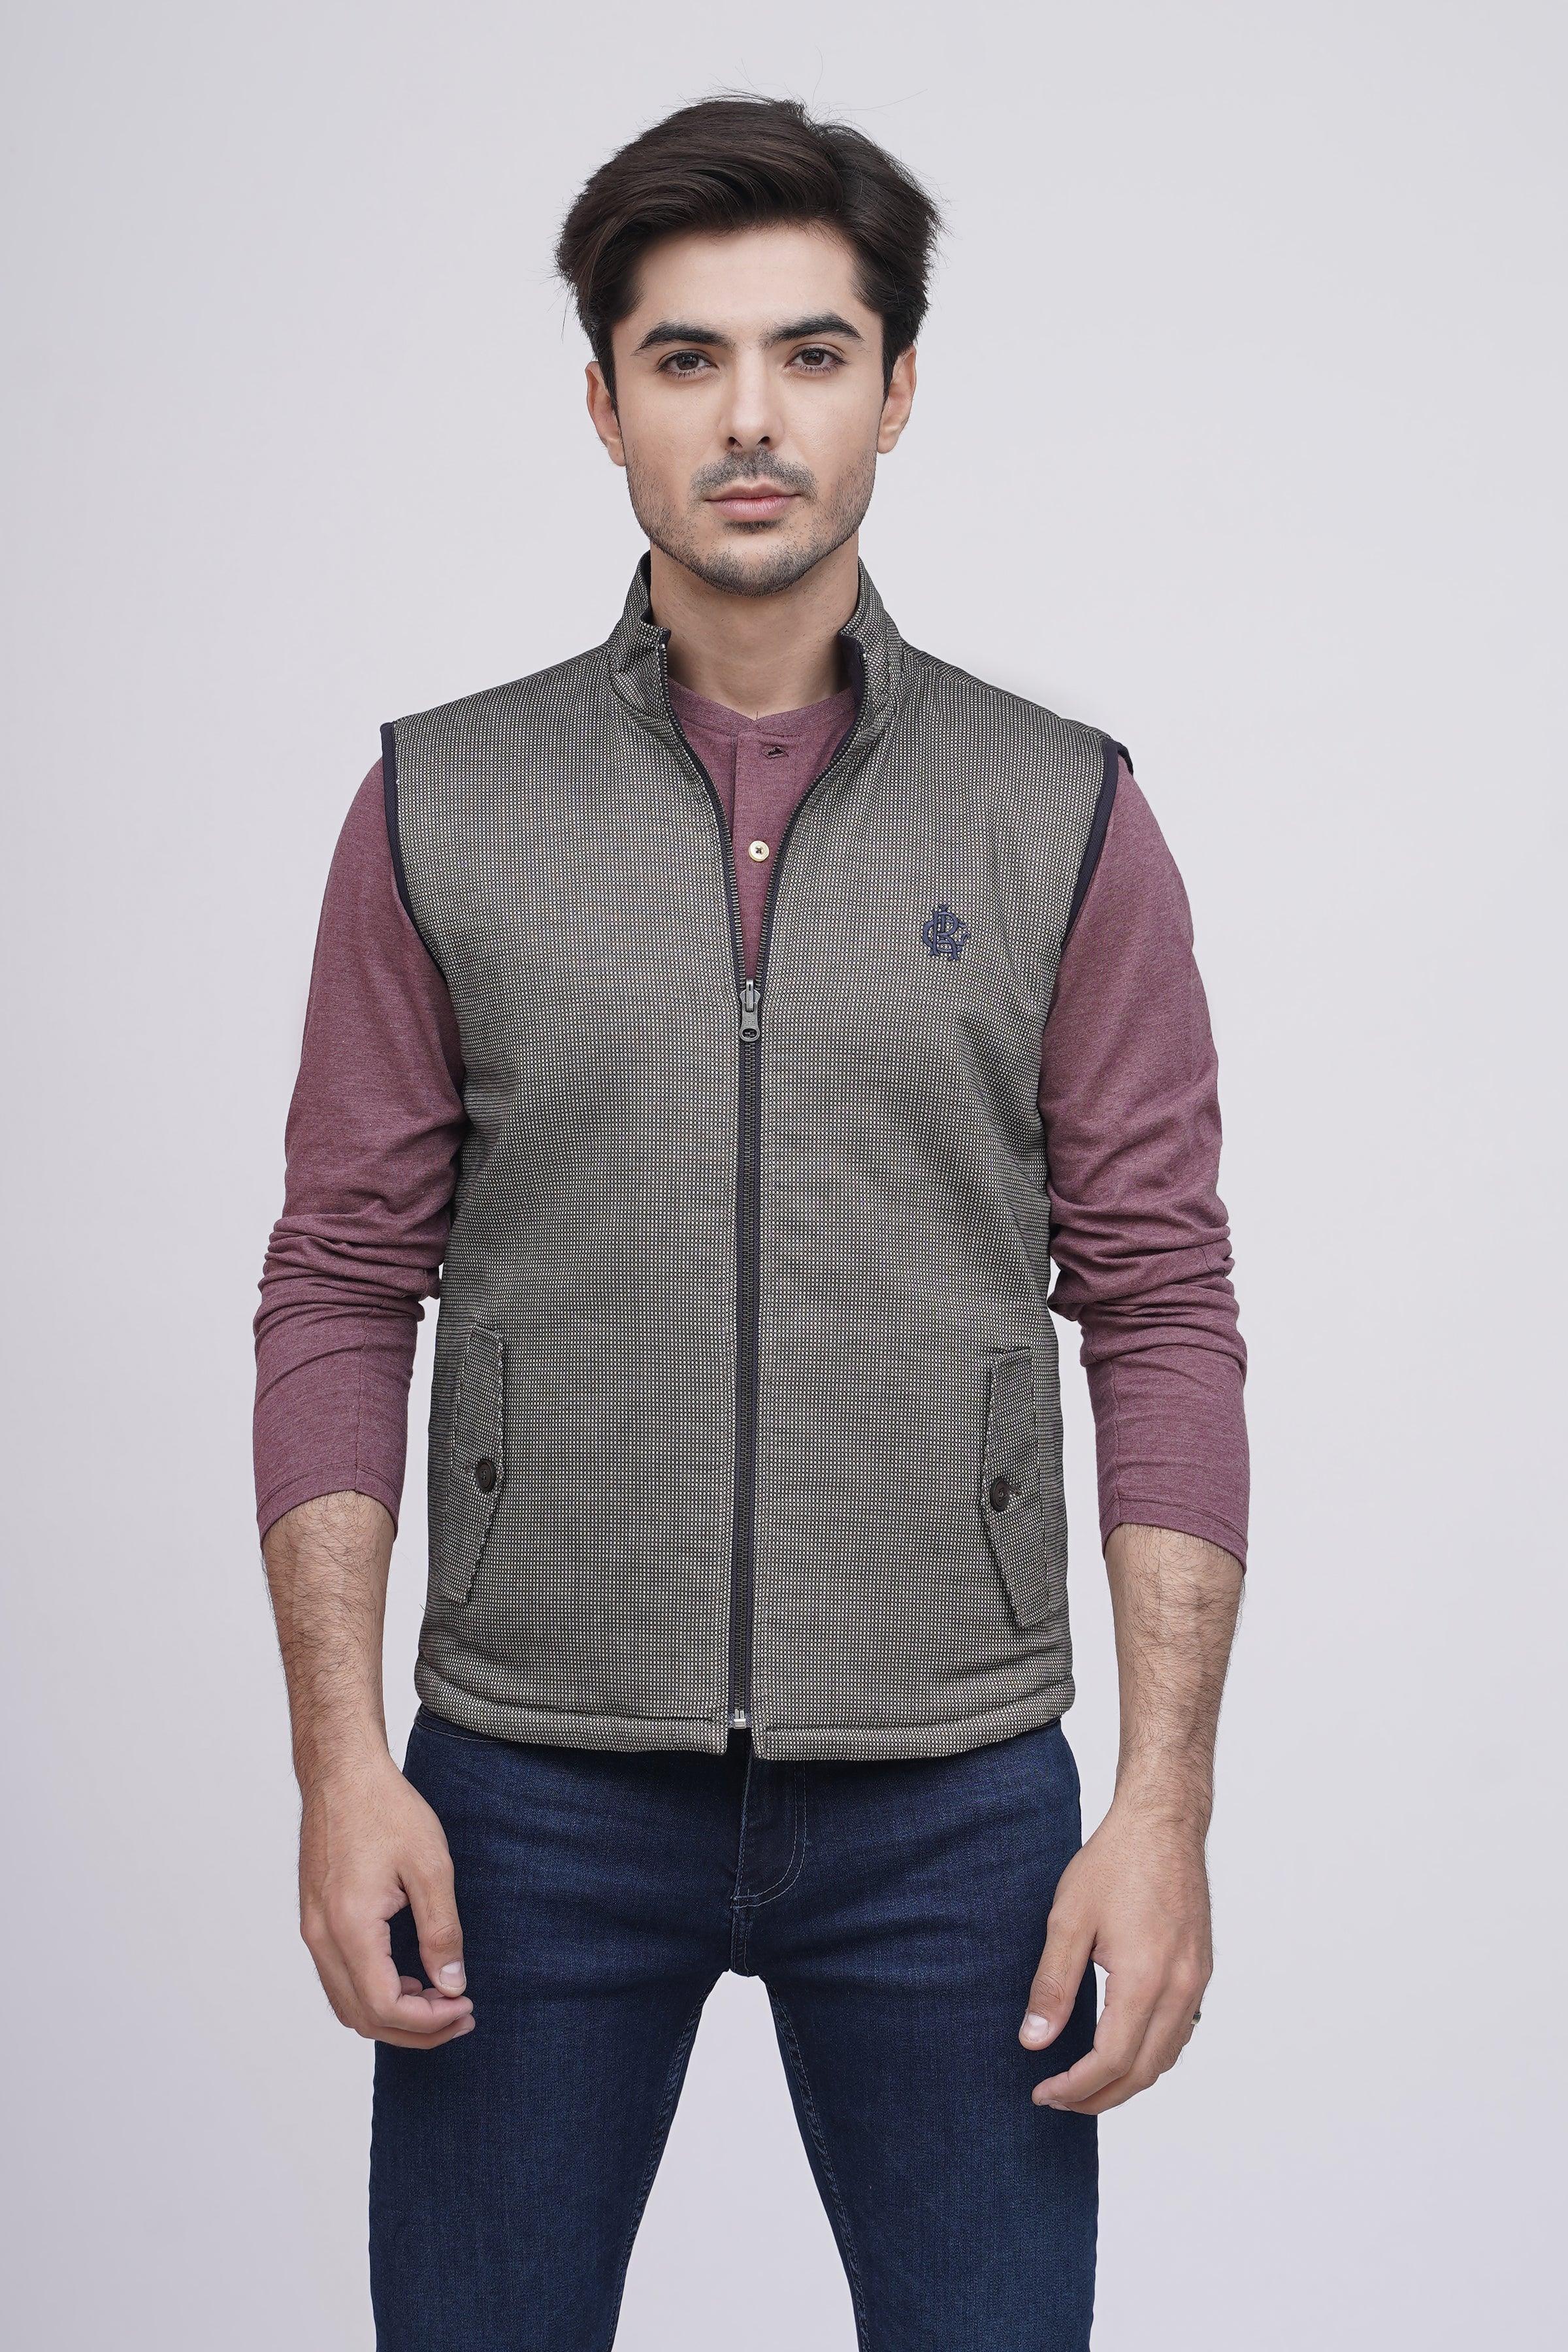 REVERSIBLE JACKET S/L BROWN WHITE at Charcoal Clothing